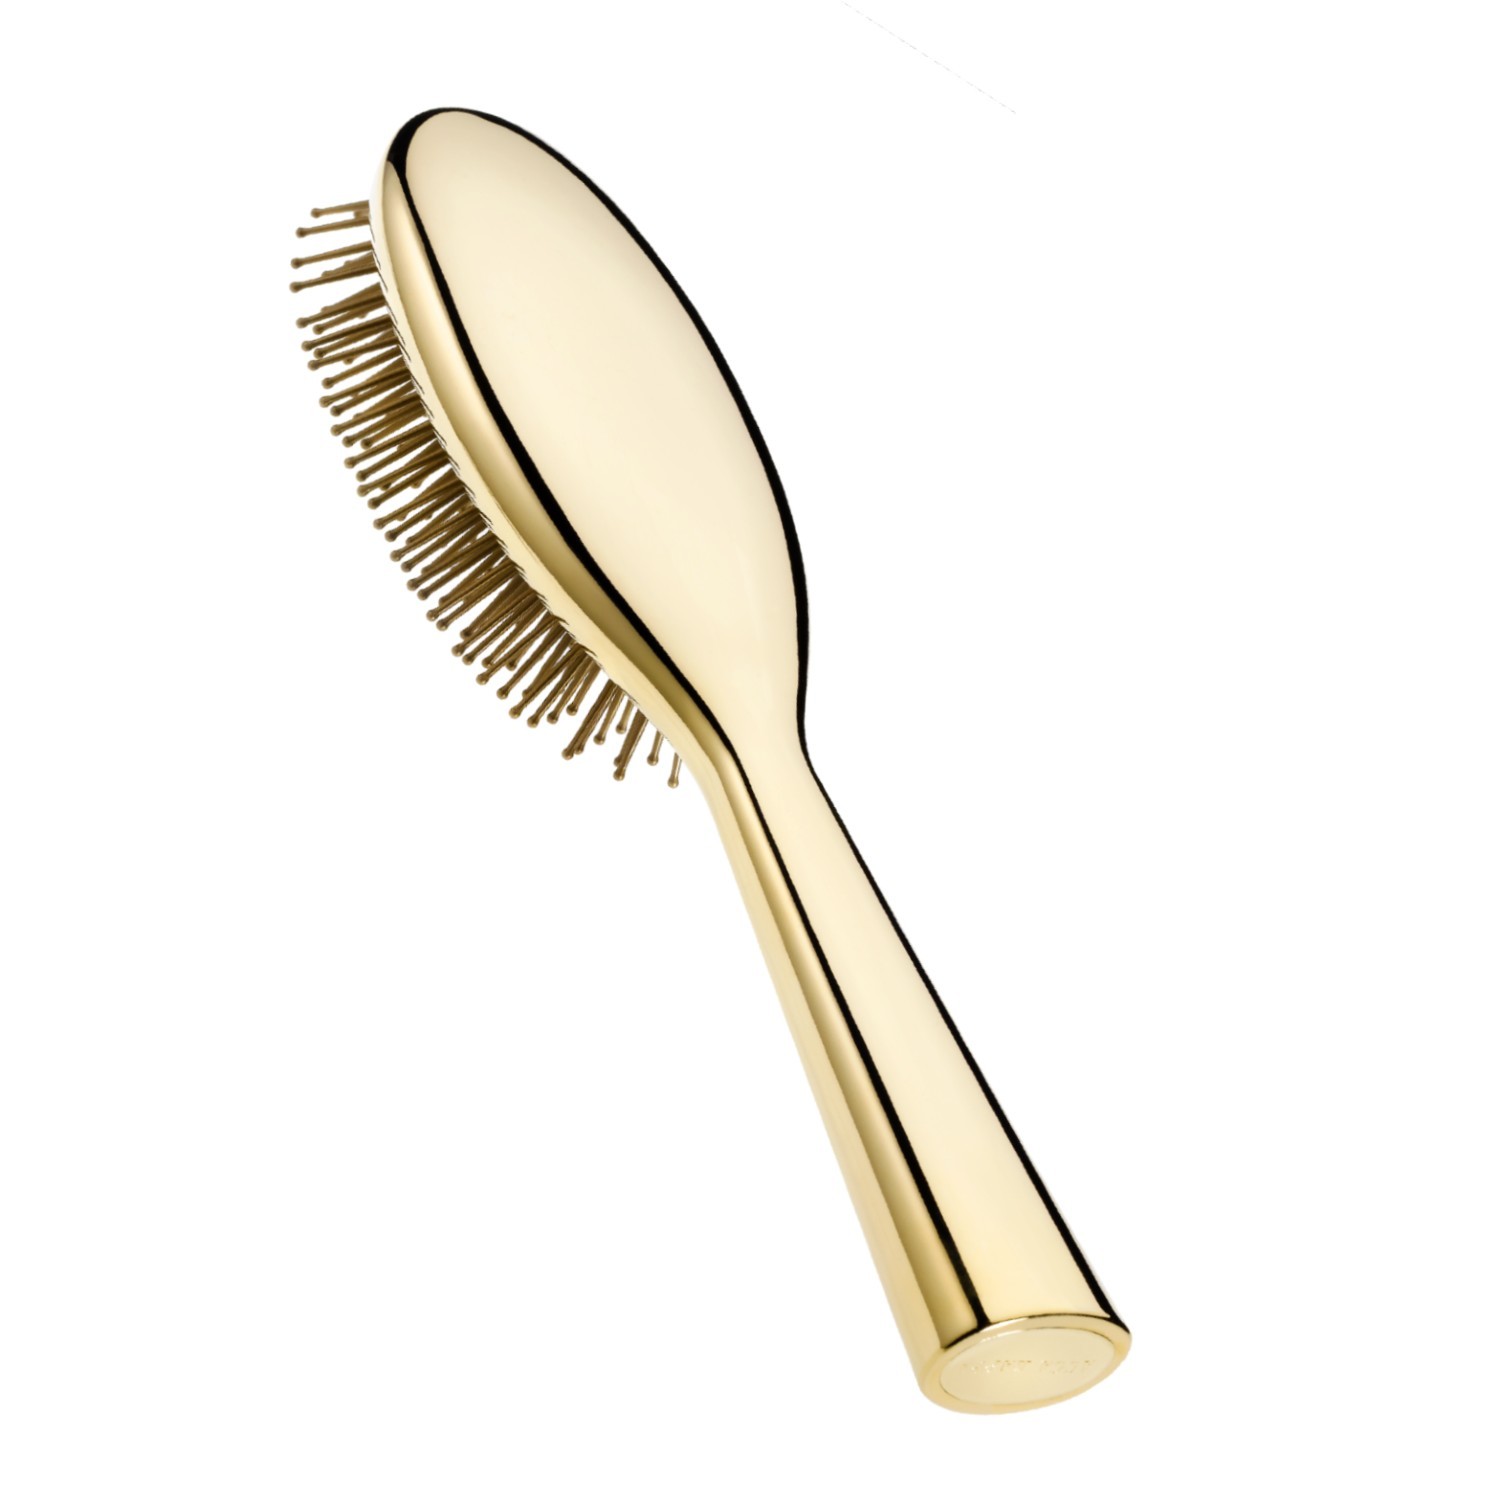 ACCA KAPPA Gold Plated Hairbrush with Natural Rubber Cushion